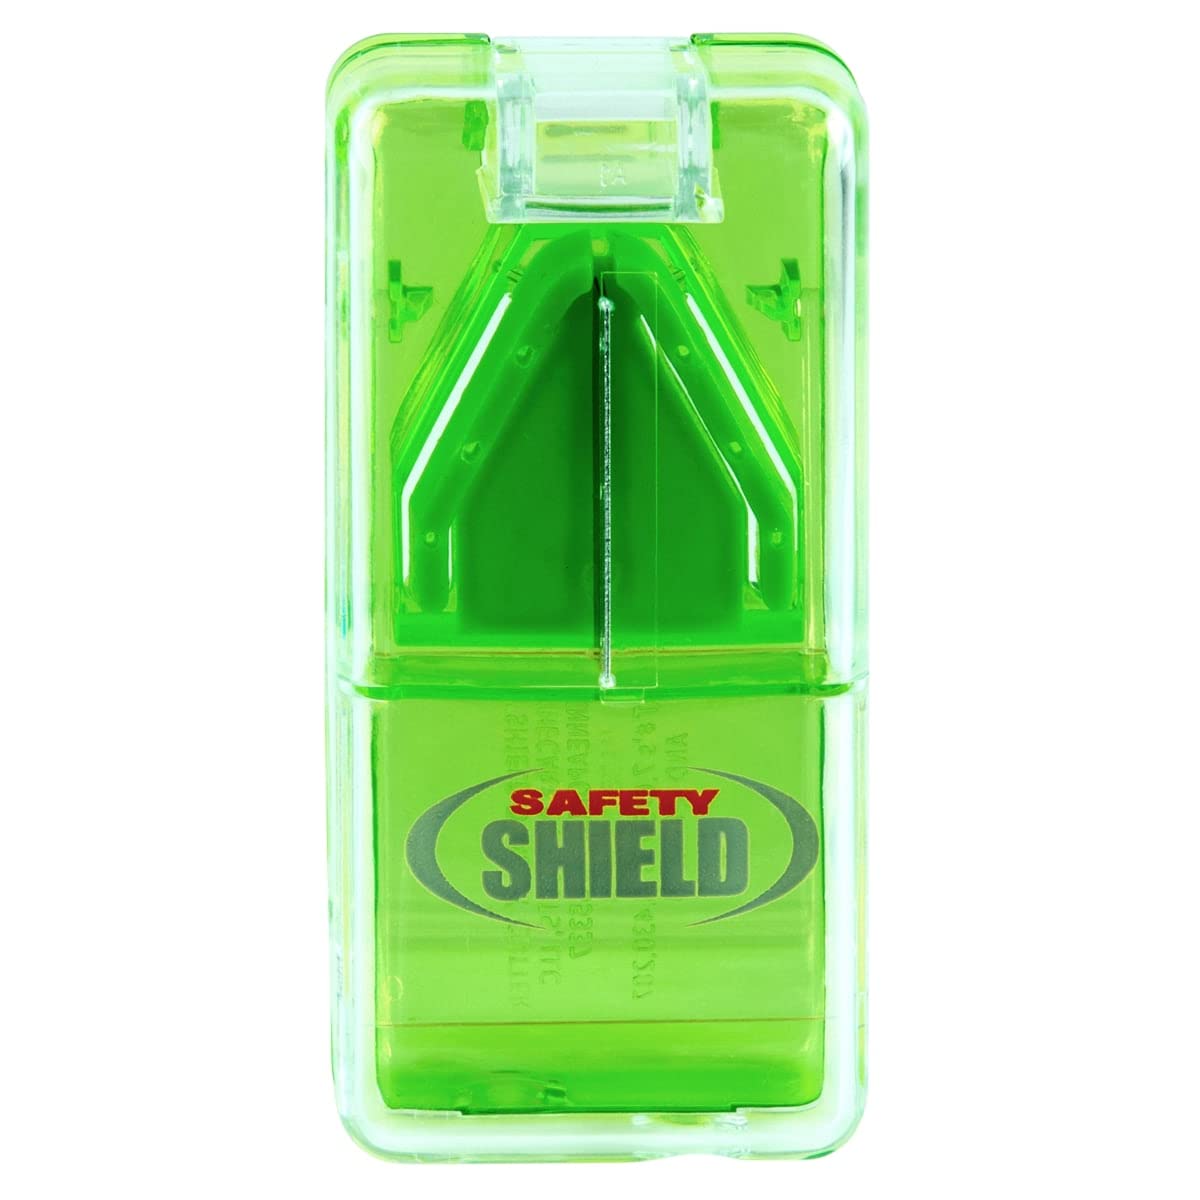 EZY DOSE Ezy Dose Pill Cutter with Safety Shield │Safely Cut Pills and Vitamins │Pill Splitter , Colors may vary